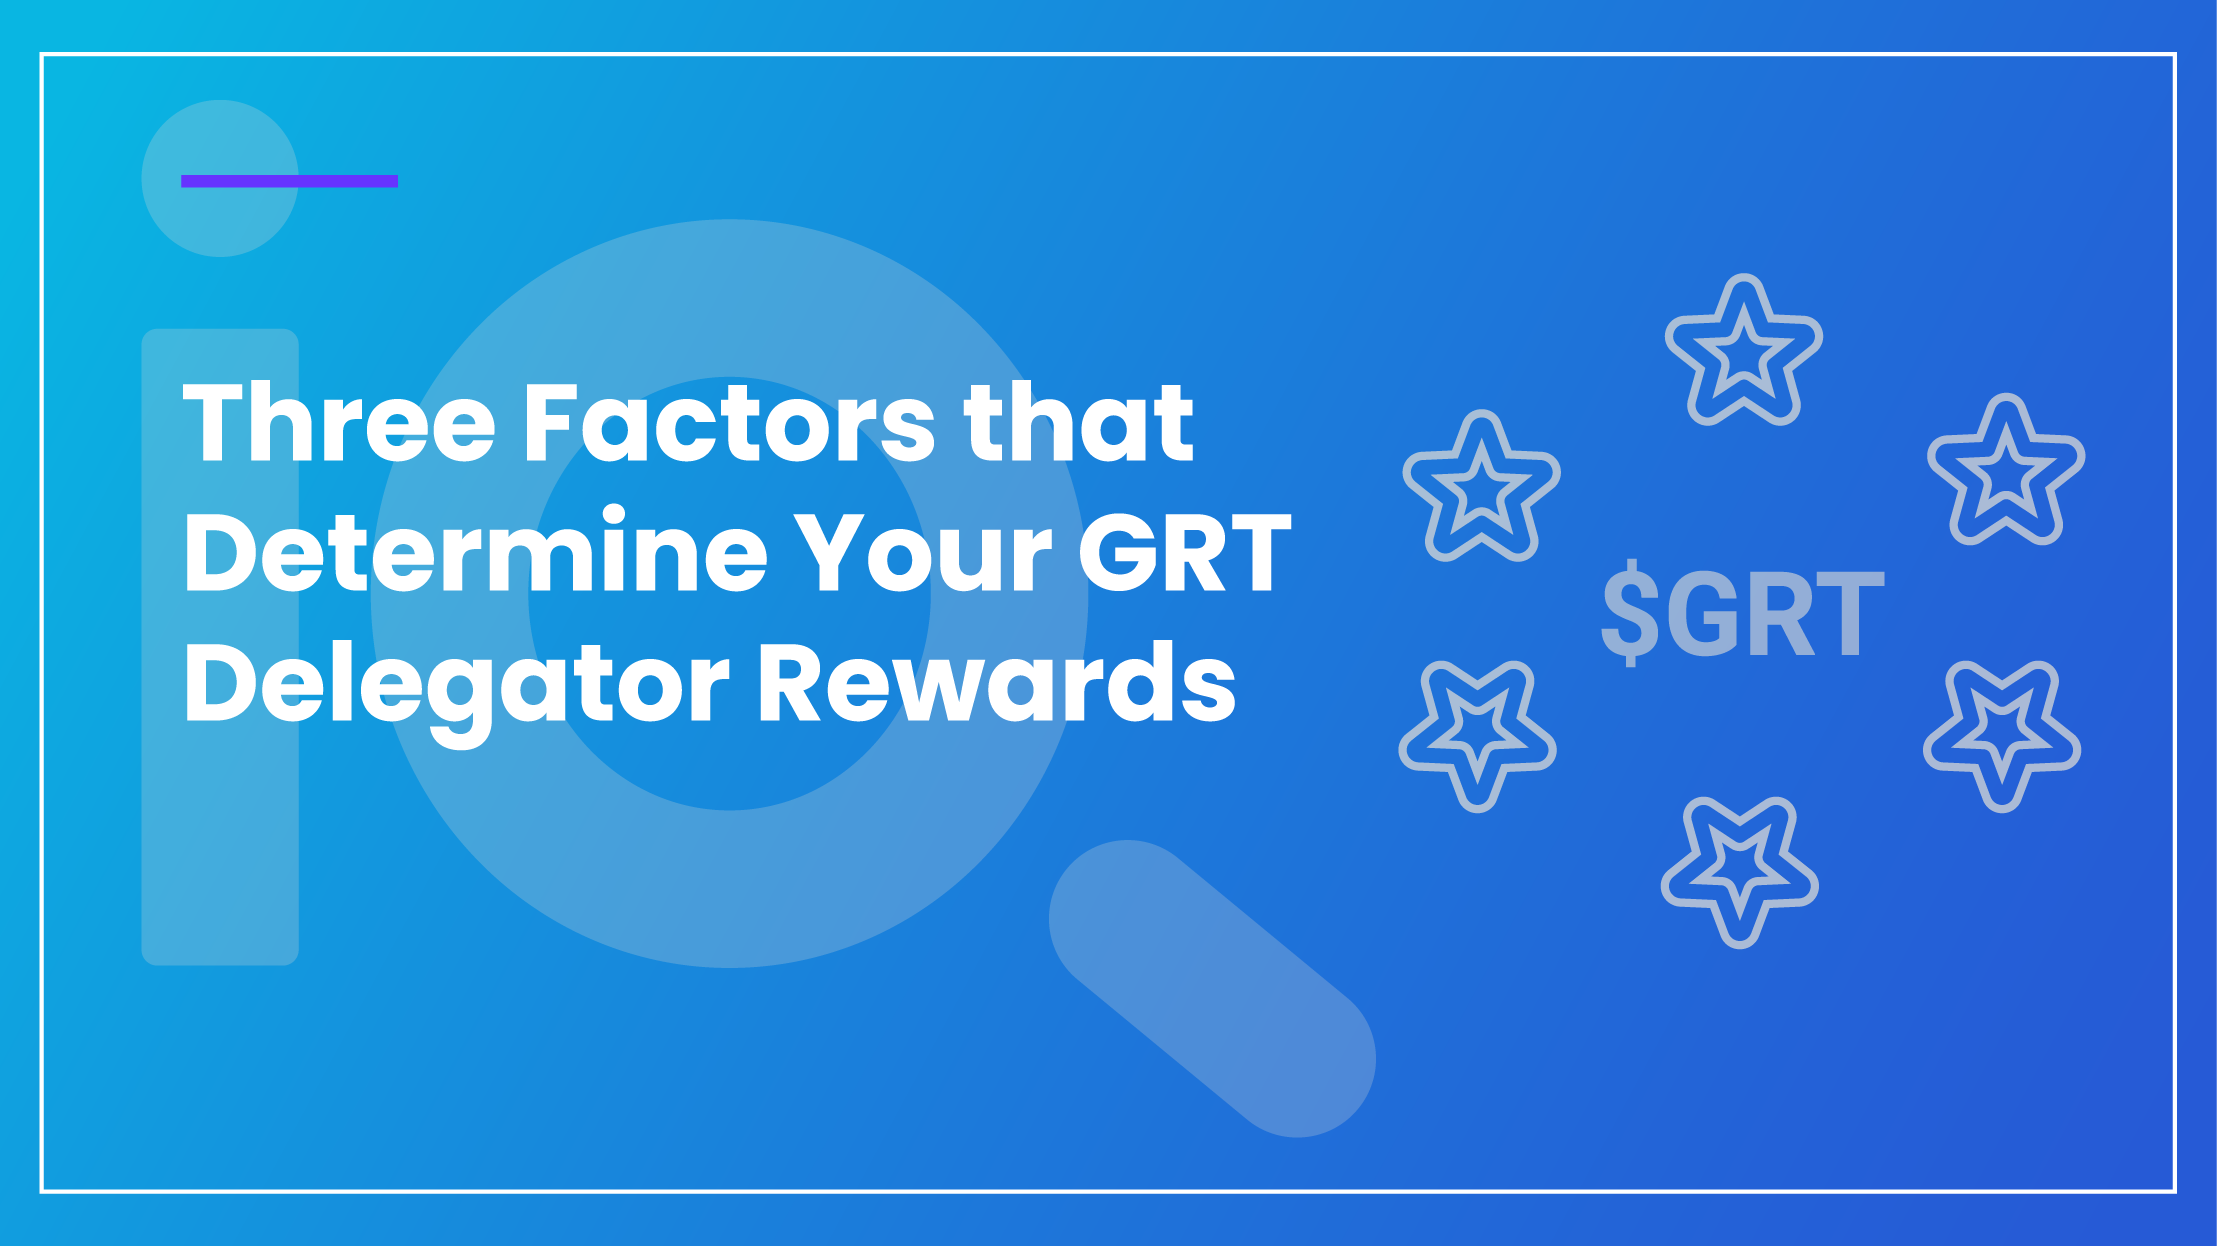 Earning GRT rewards as a Delegator at The Graph